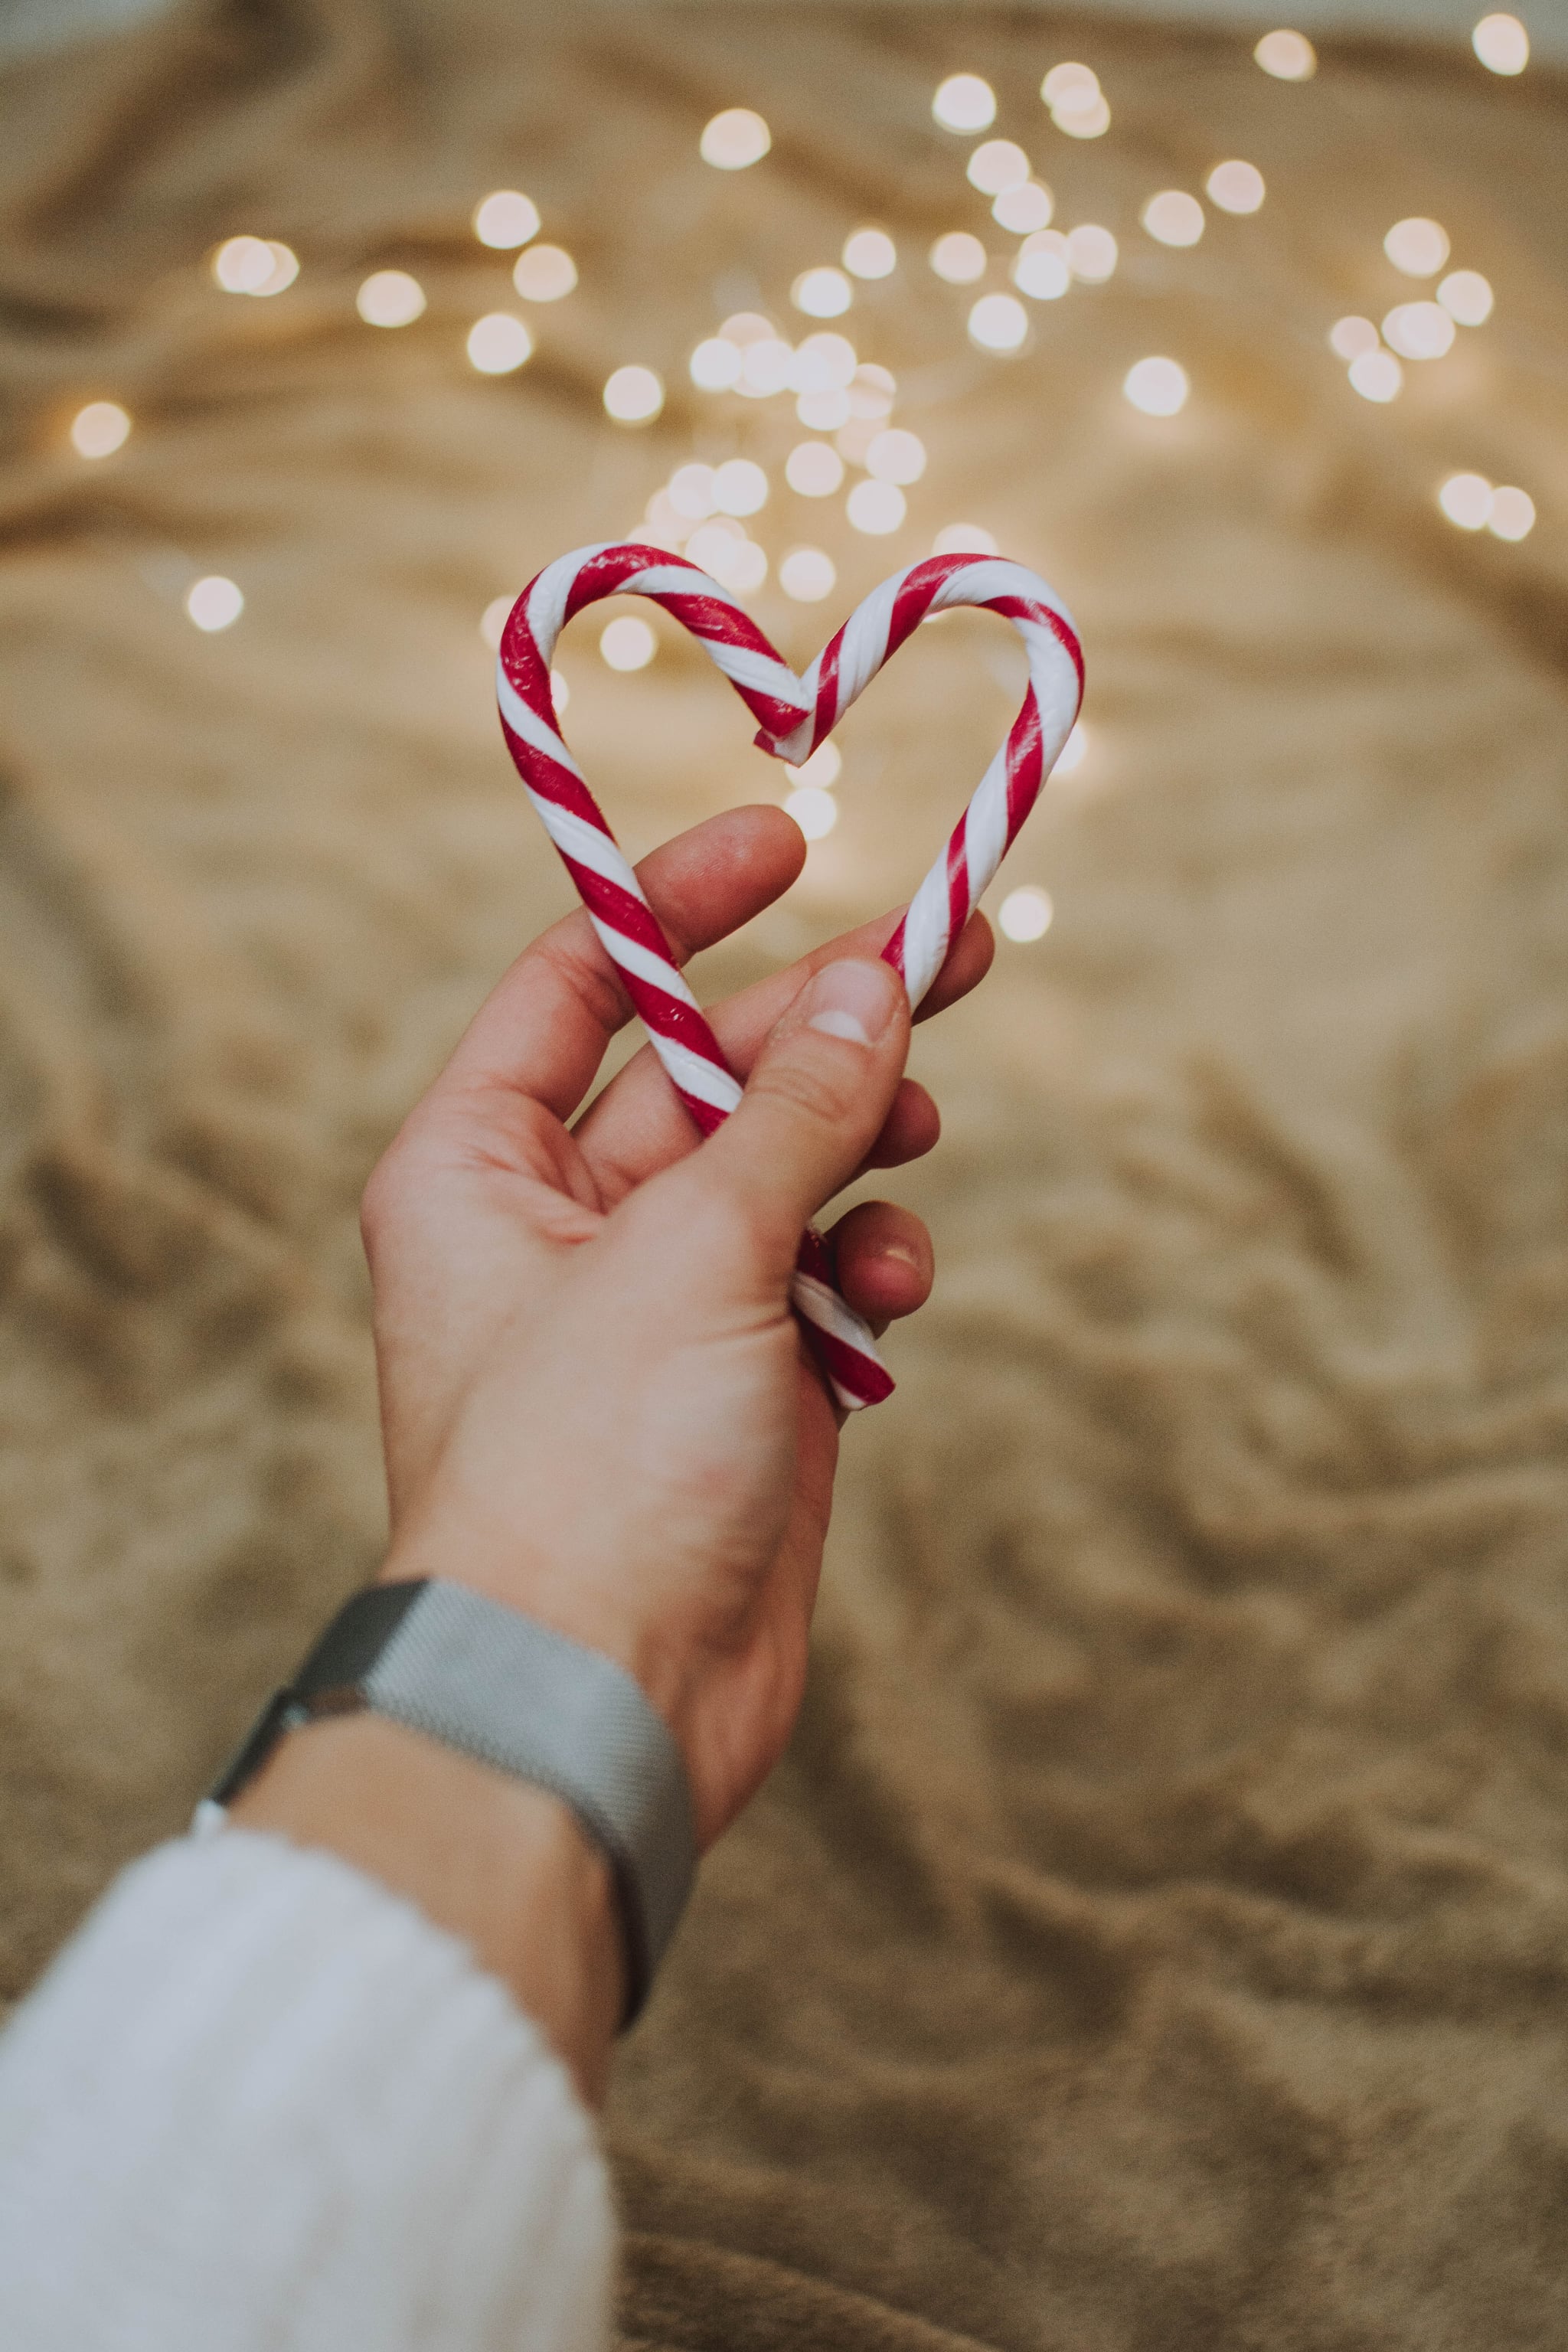 A person holding two candy canes in the shape of a heart. - Candy cane, candy